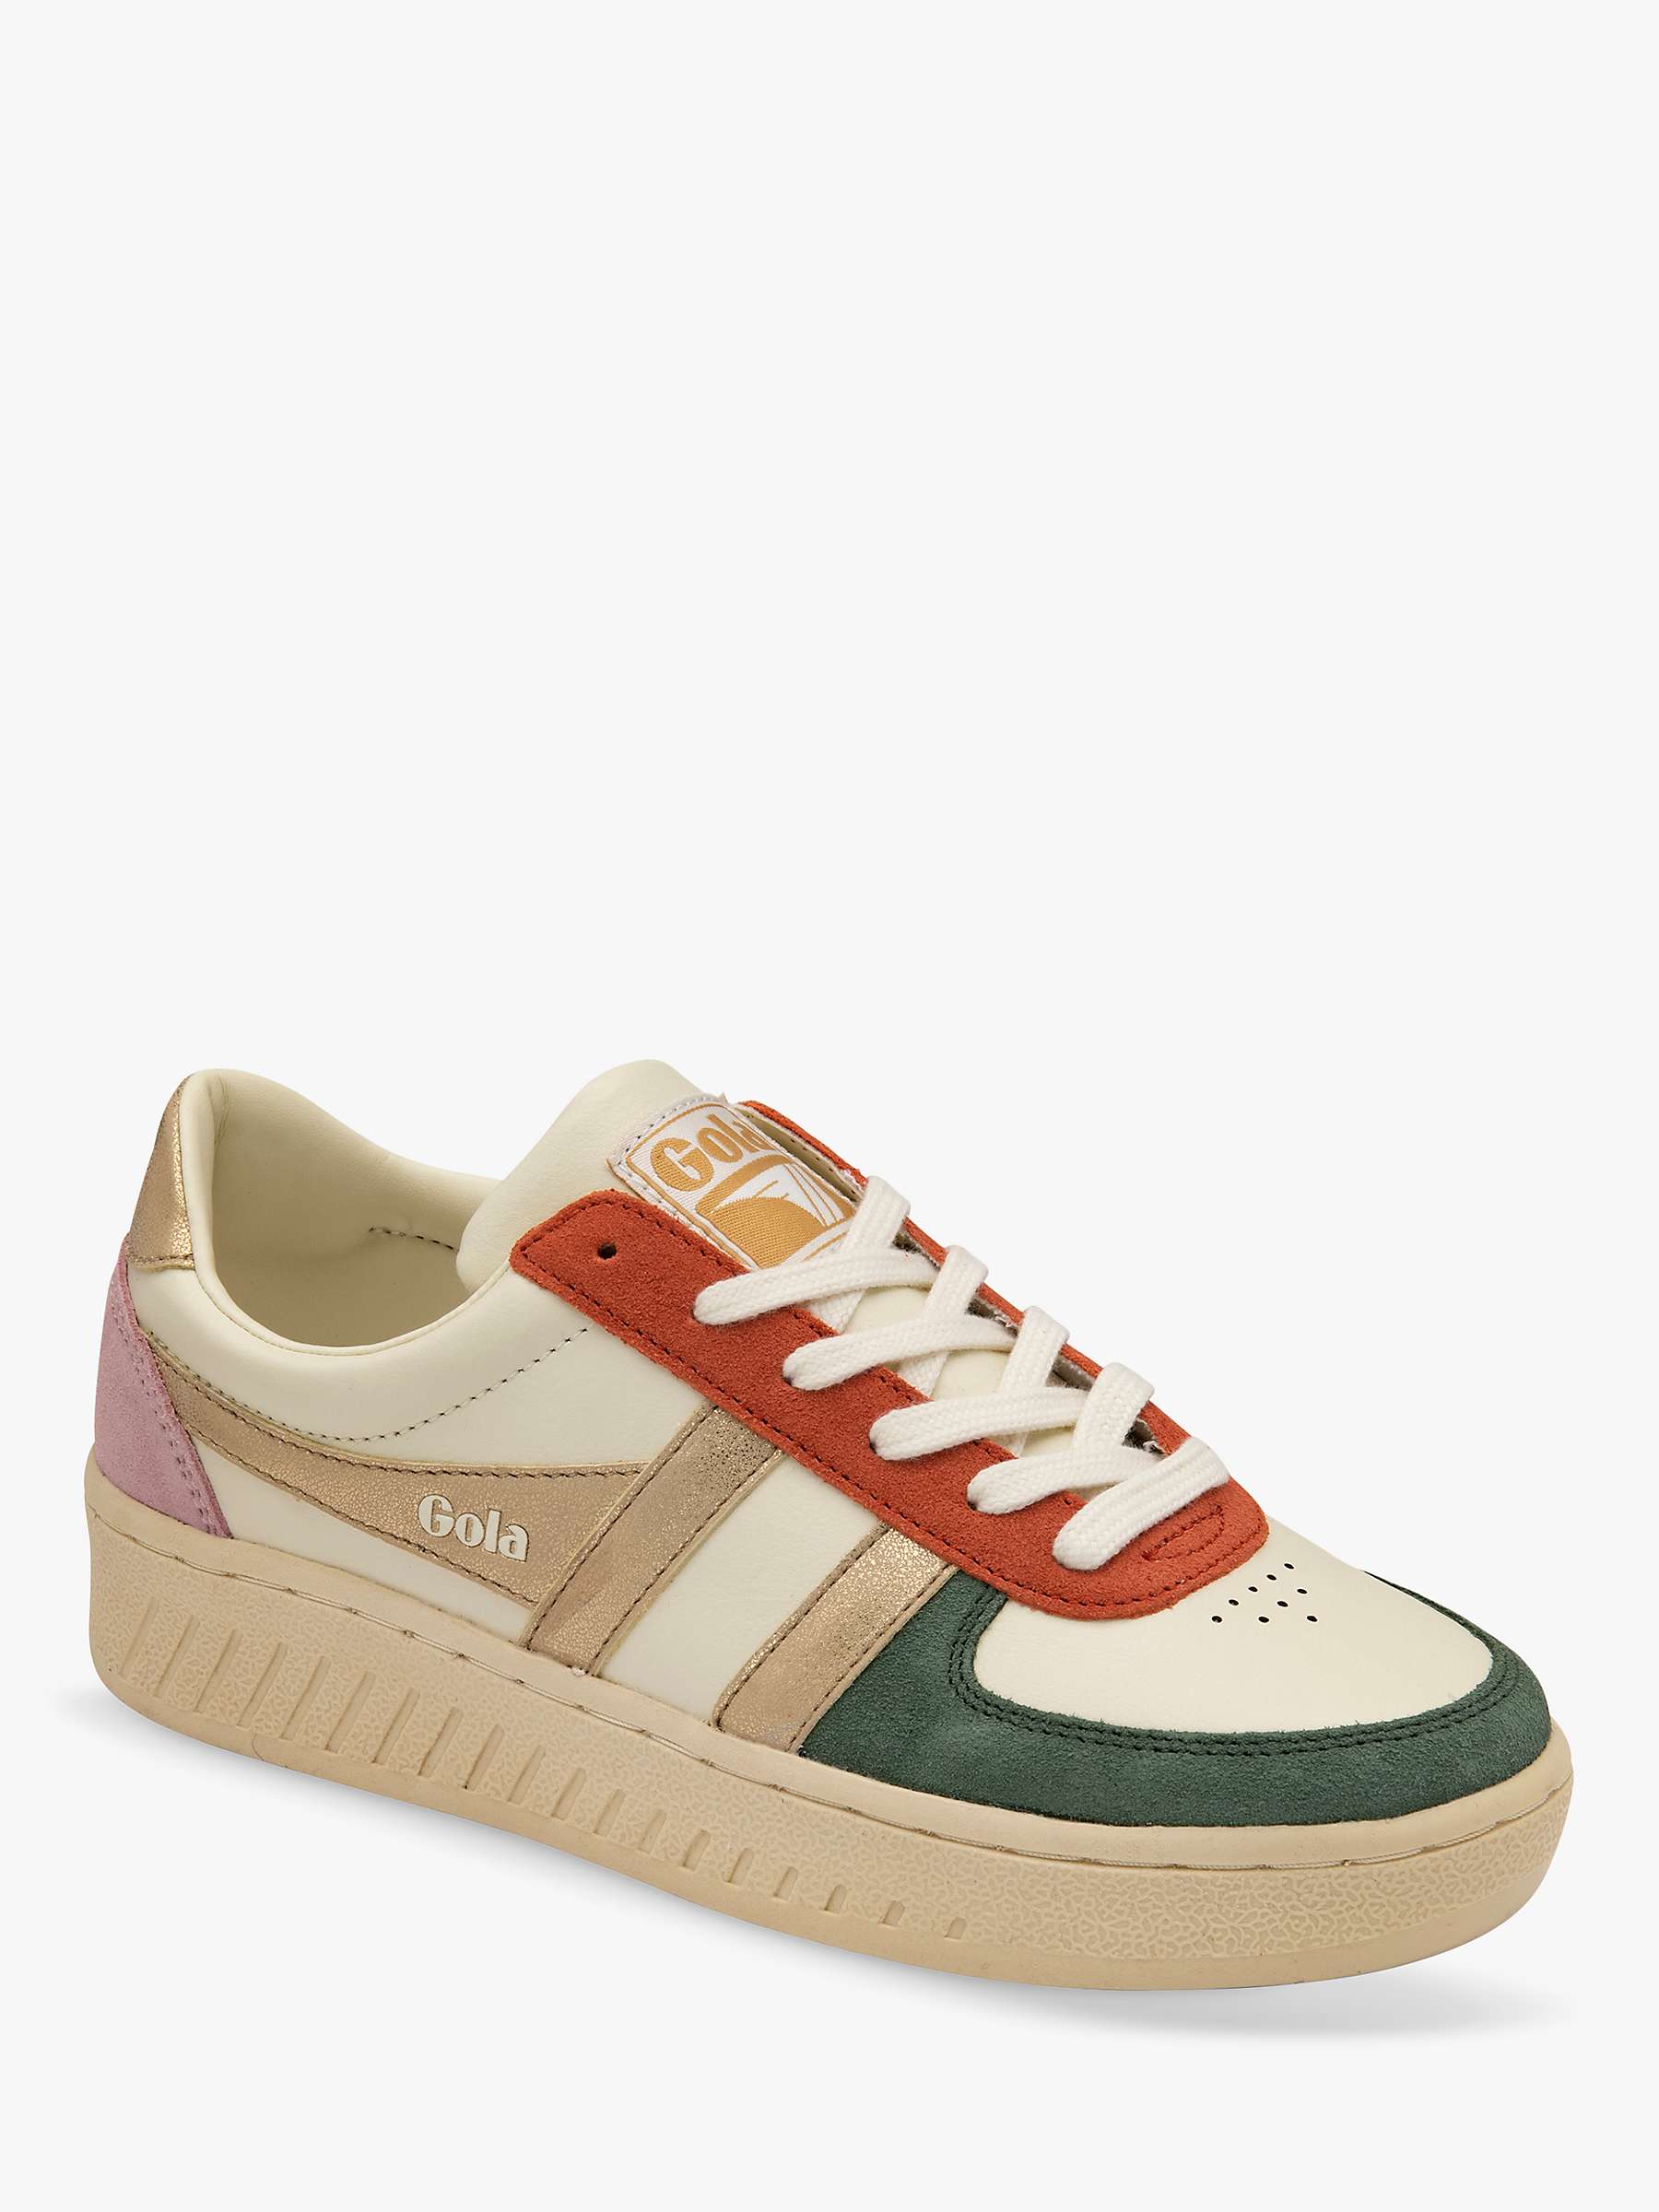 Buy Gola Classics Grandslam Quadrant Lace Up Trainers, Off White/Sage/Gold Online at johnlewis.com